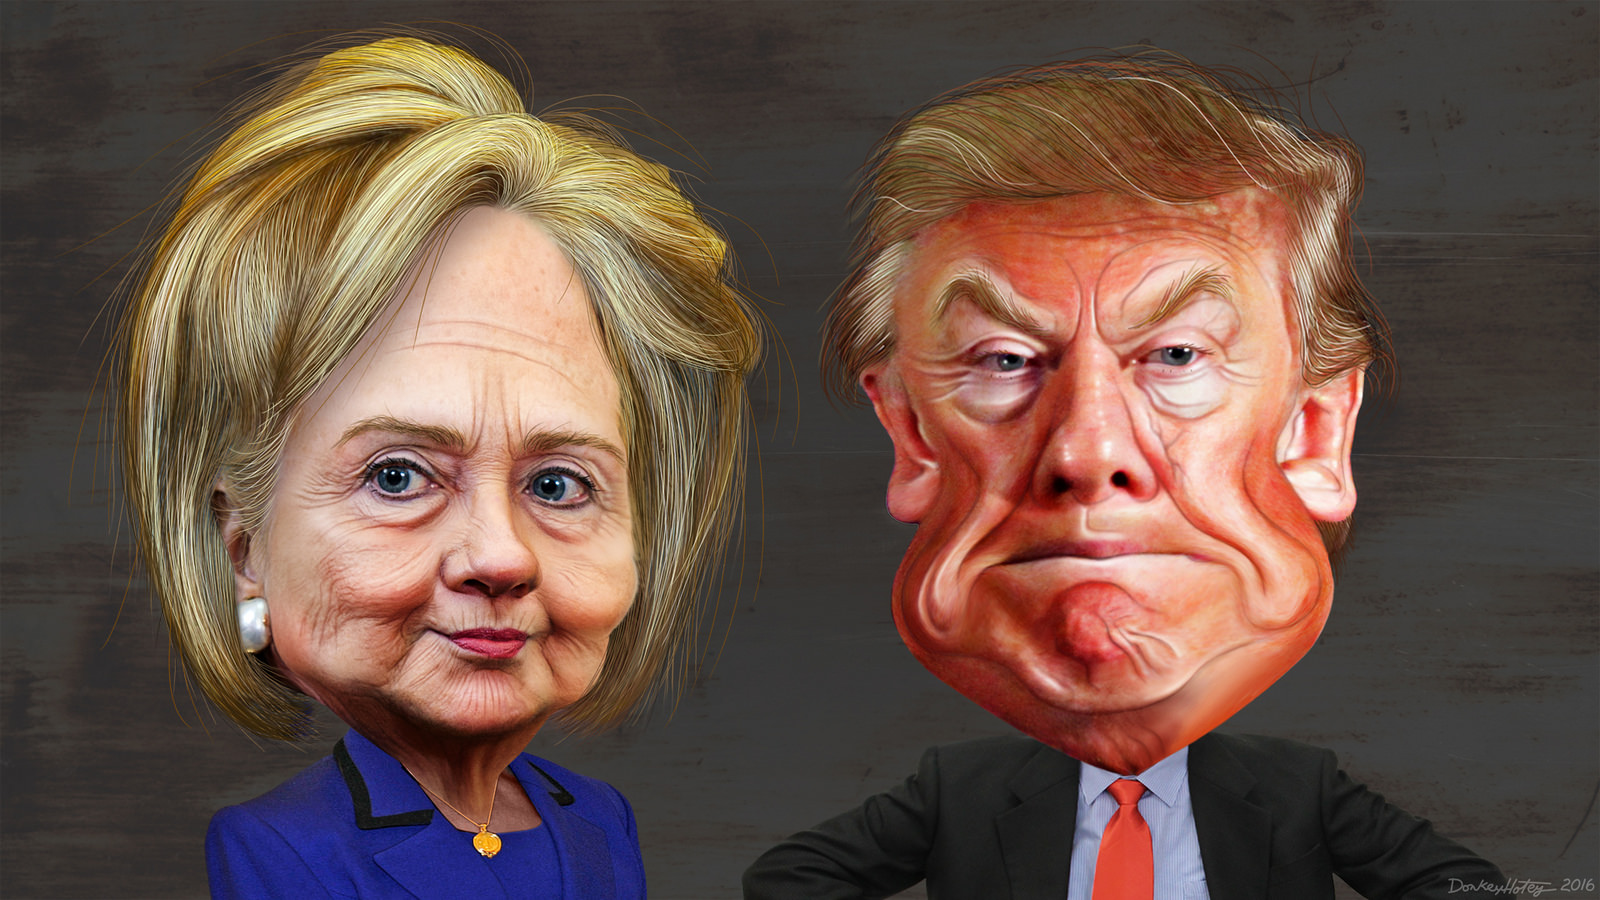 Caricature of Hillary Clinton and Donald Trump (Image by DonkeyHotey at Flickr.com under license CC BY SA 2.0)